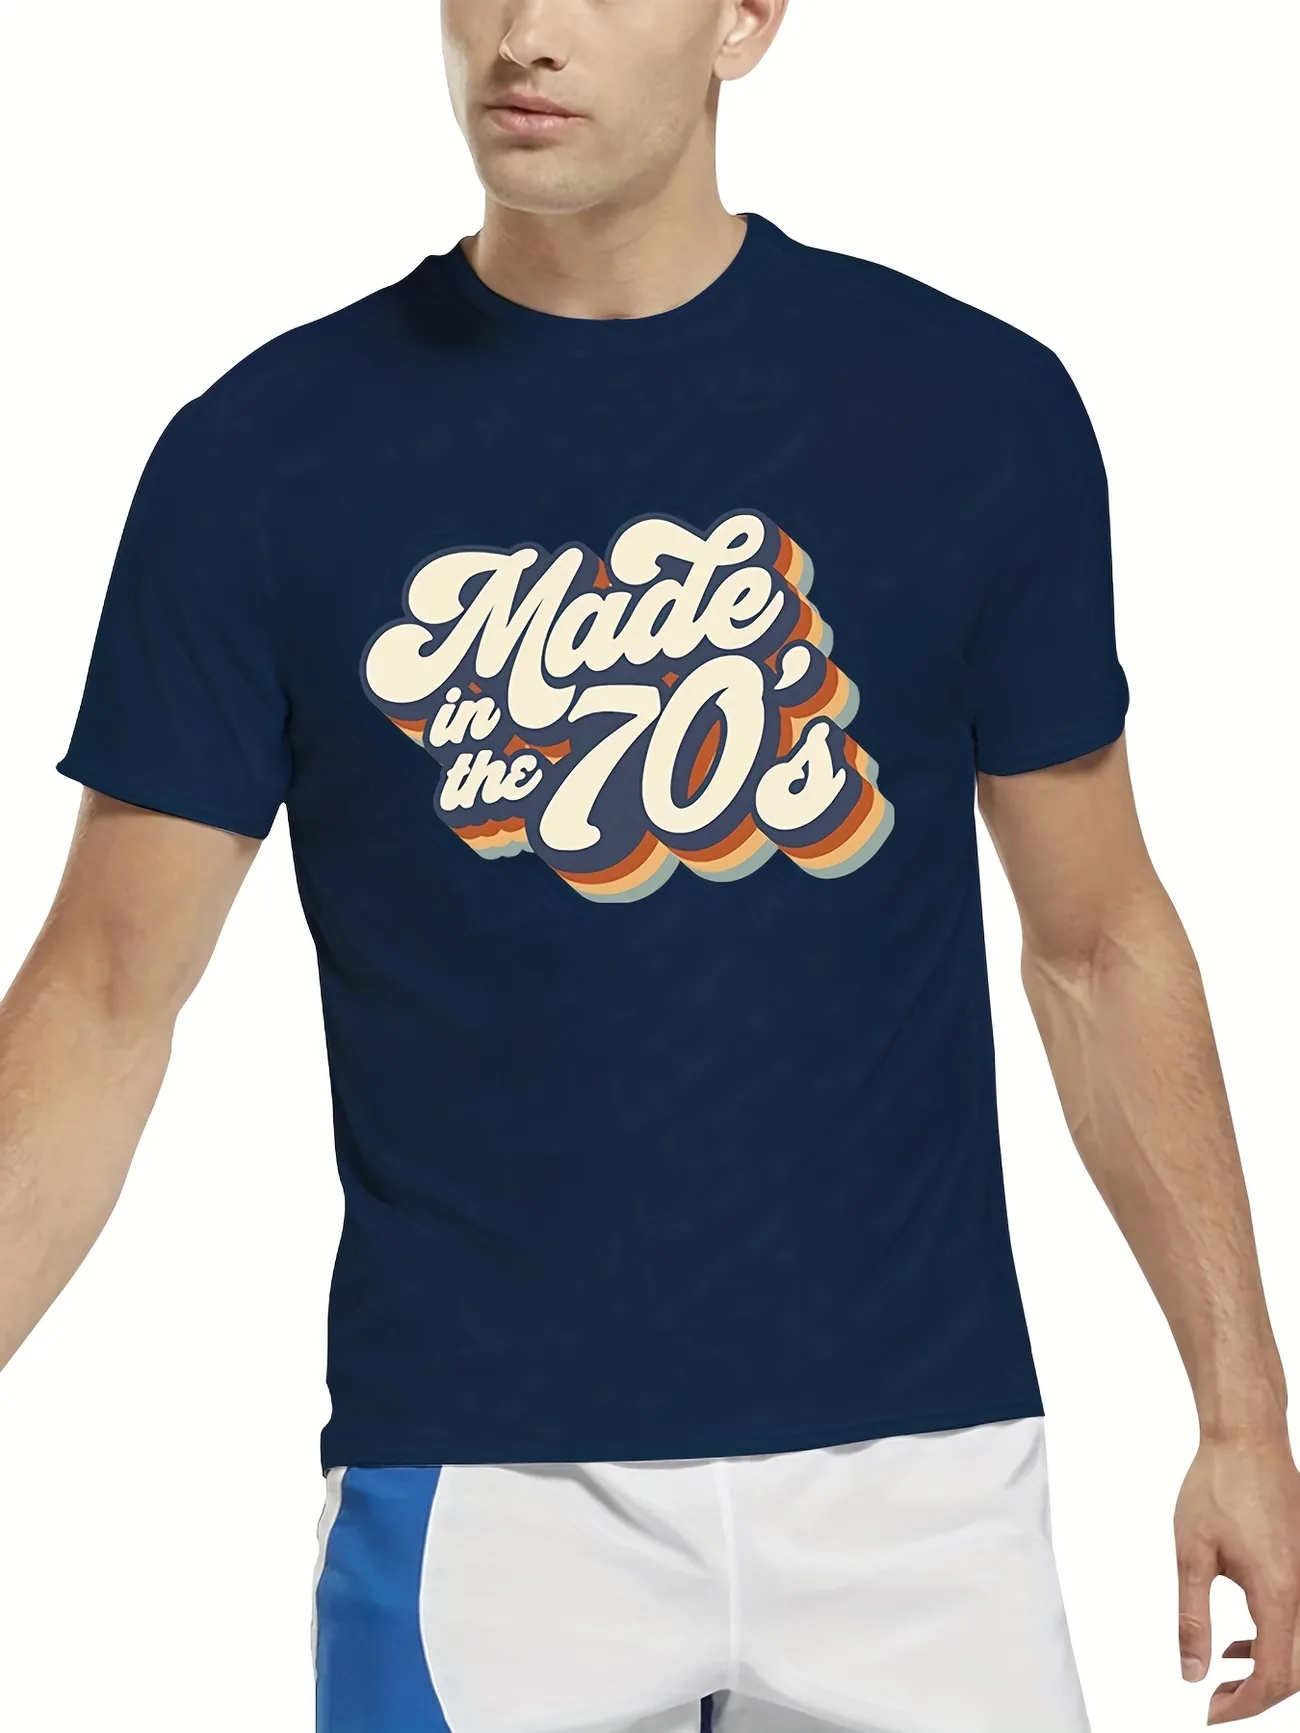 made In 70's Trendy T-shirt For Men, Plus Size Comfy Summer